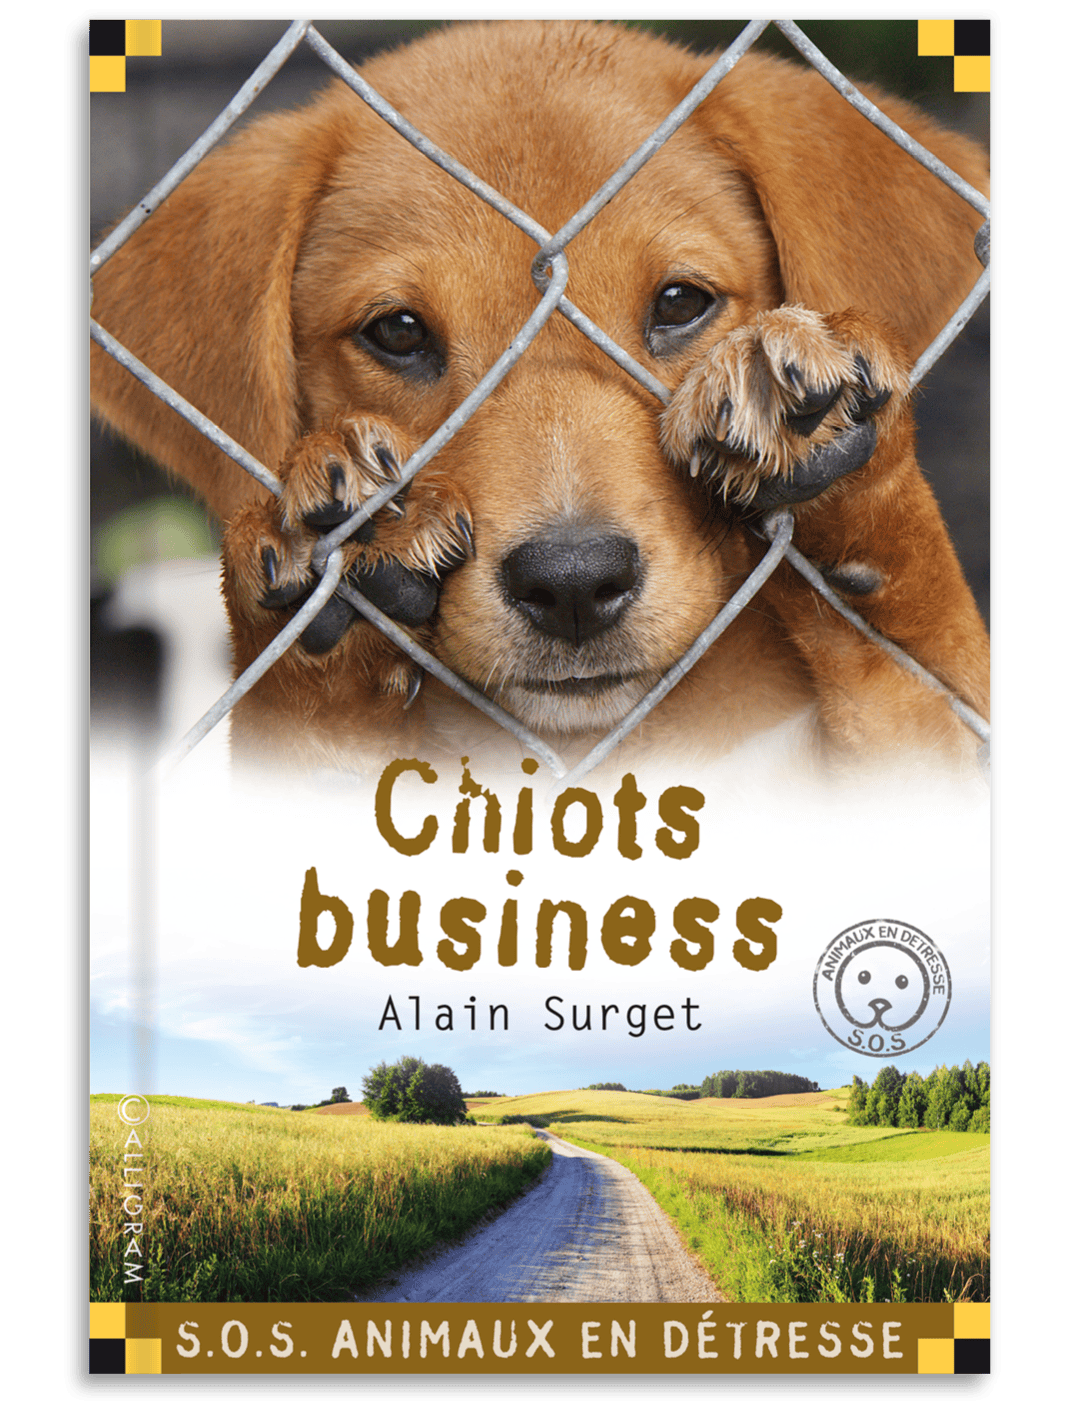 sos-animaux_9782884806497_19-CHIOTS-BUSINESS_c1